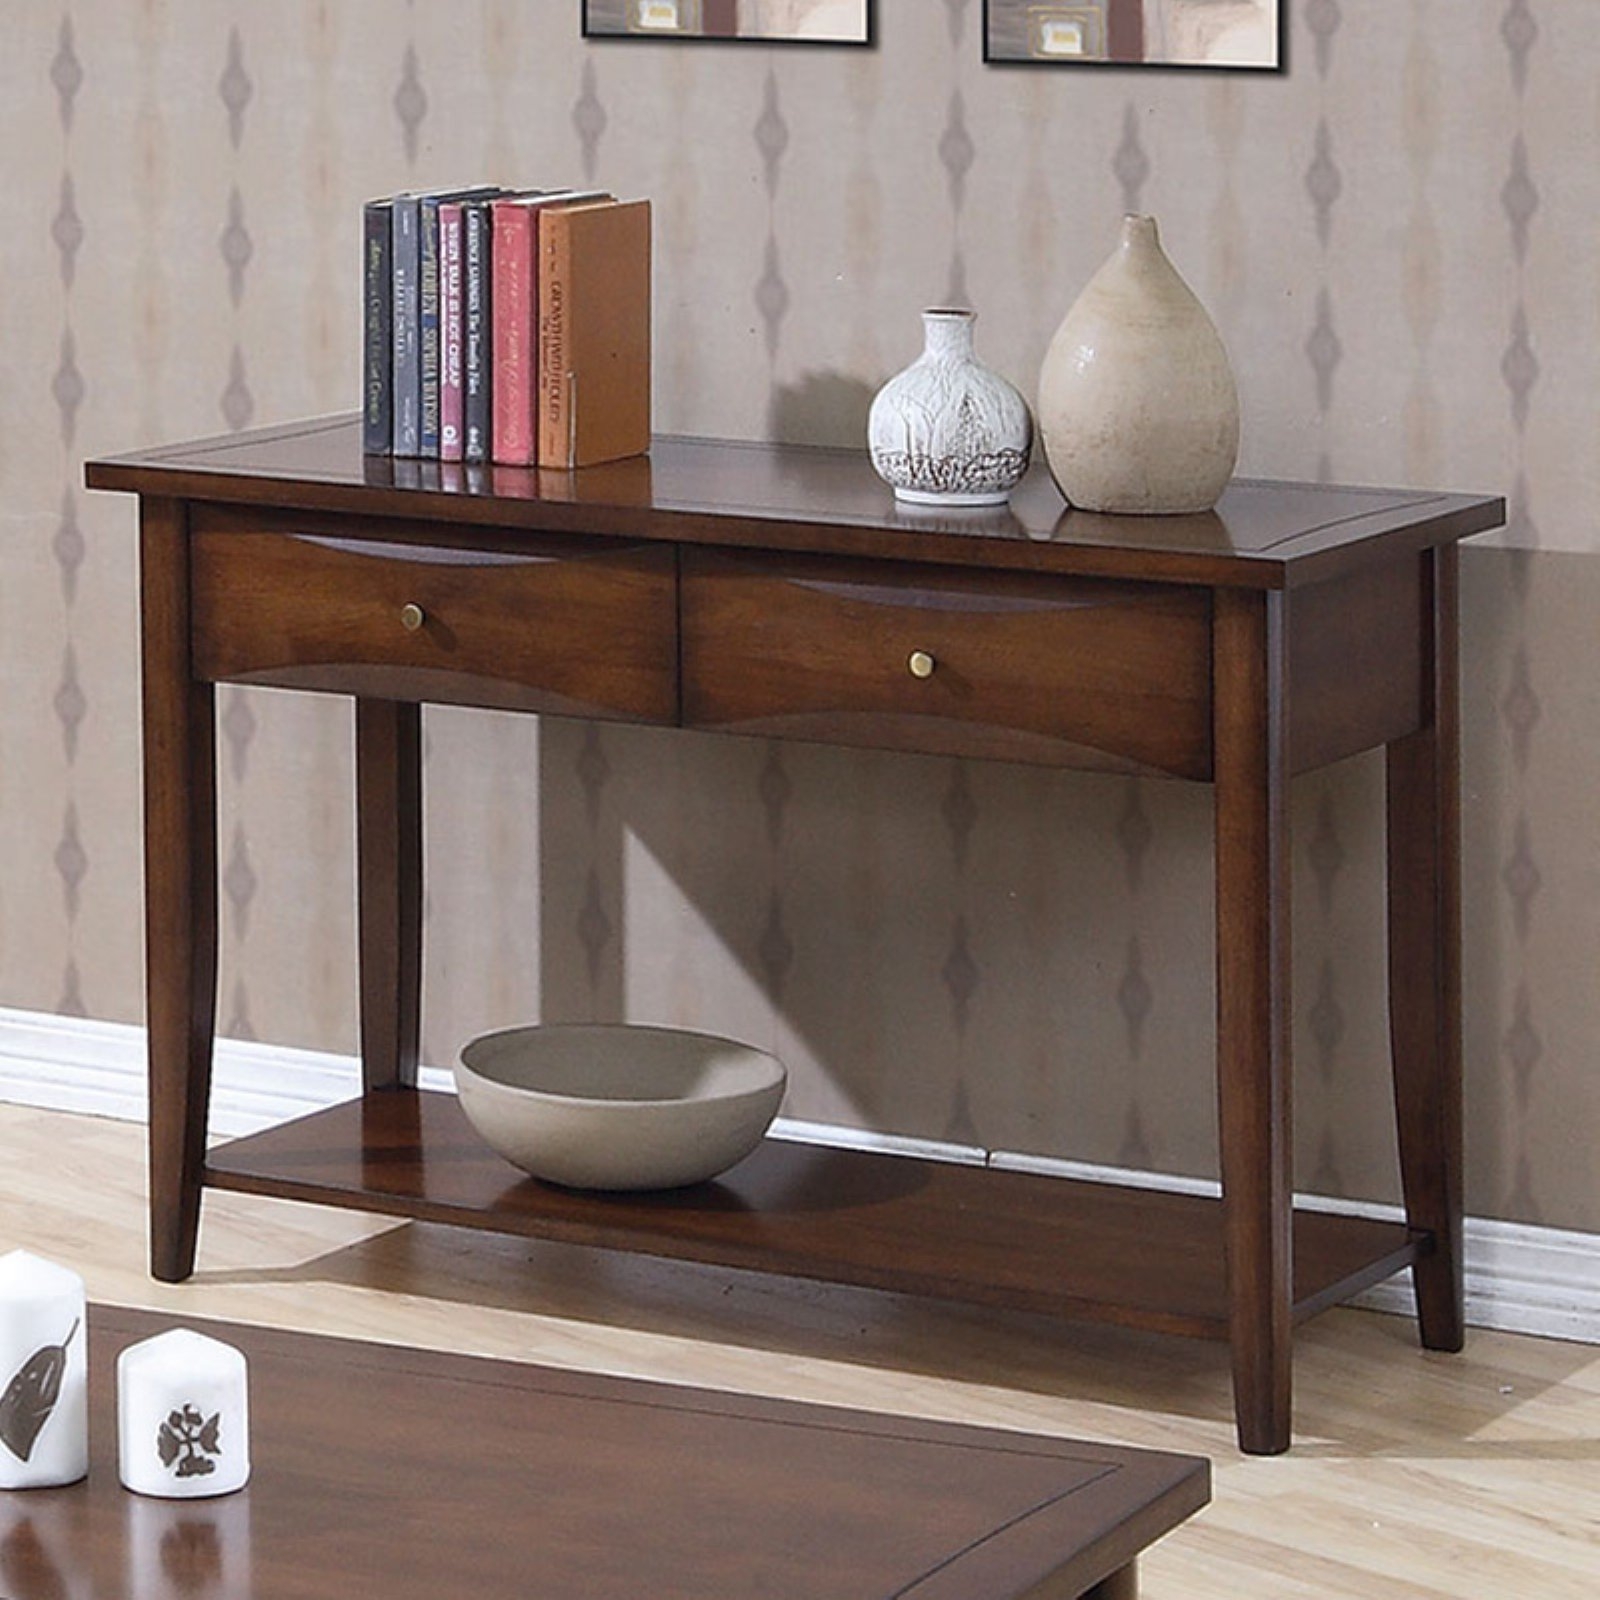 Sofa table with storage drawers 18